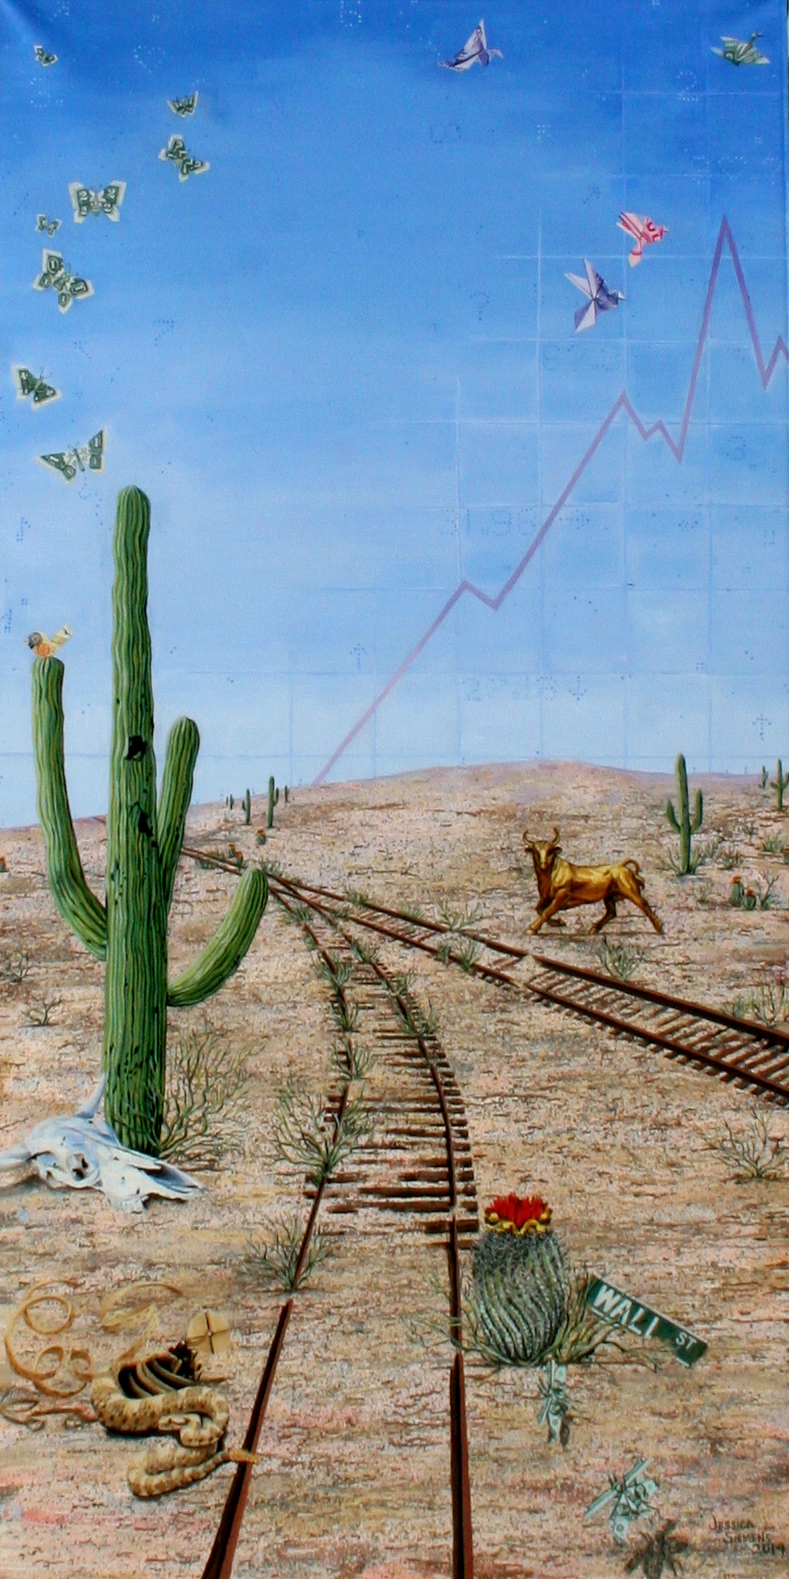 First Allied Surreal Landscape, oil on canvas, 4x8 ft, Jessica Siemens 2014